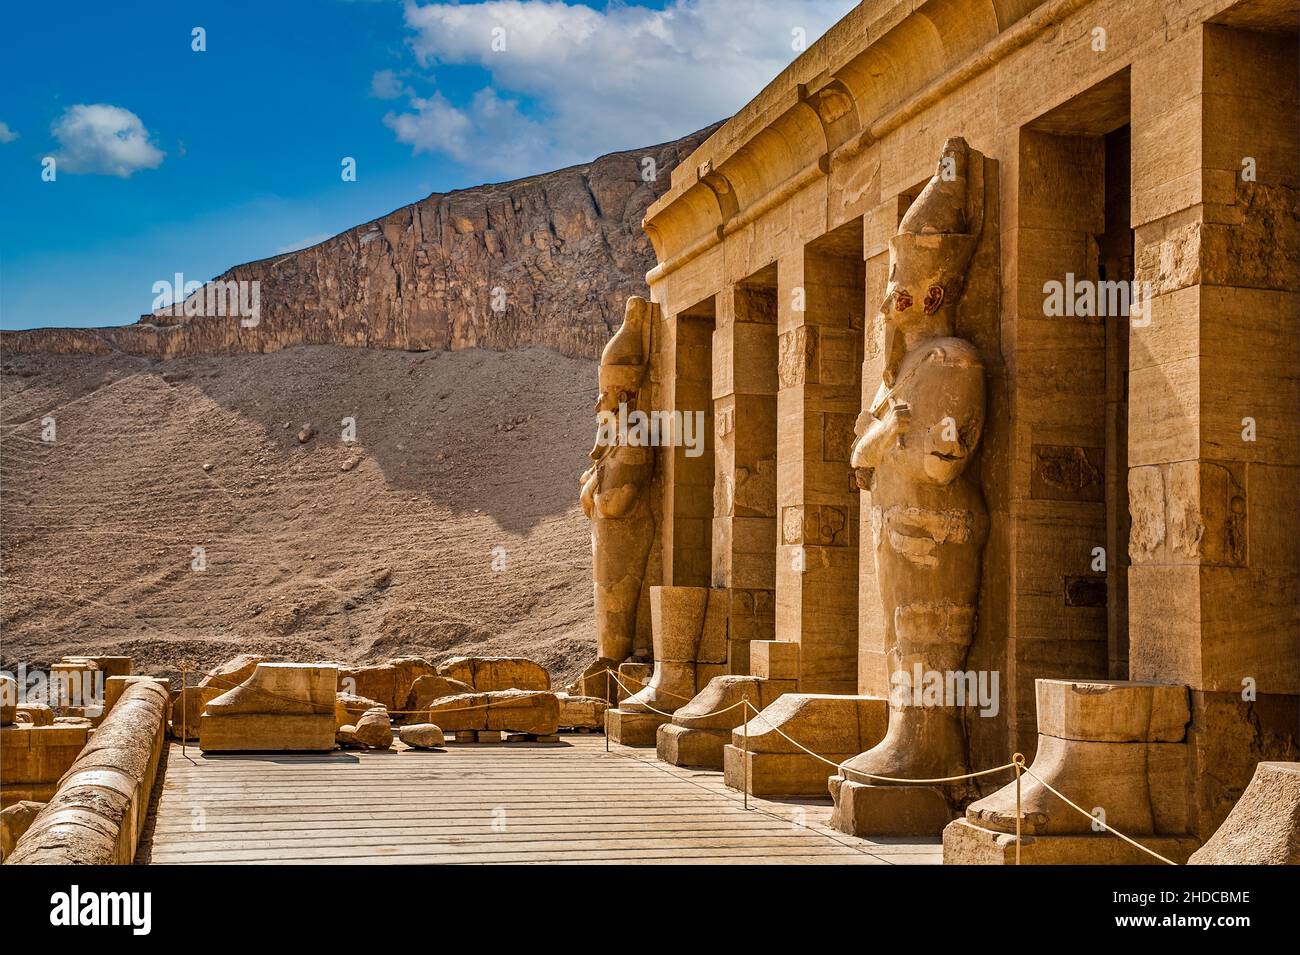 Hatshepsut's larger-than-life (5 m) statues of Osiris in the central colonnade, statues in the robes of the god Osiris, funerary temple of the pharaoh Stock Photo